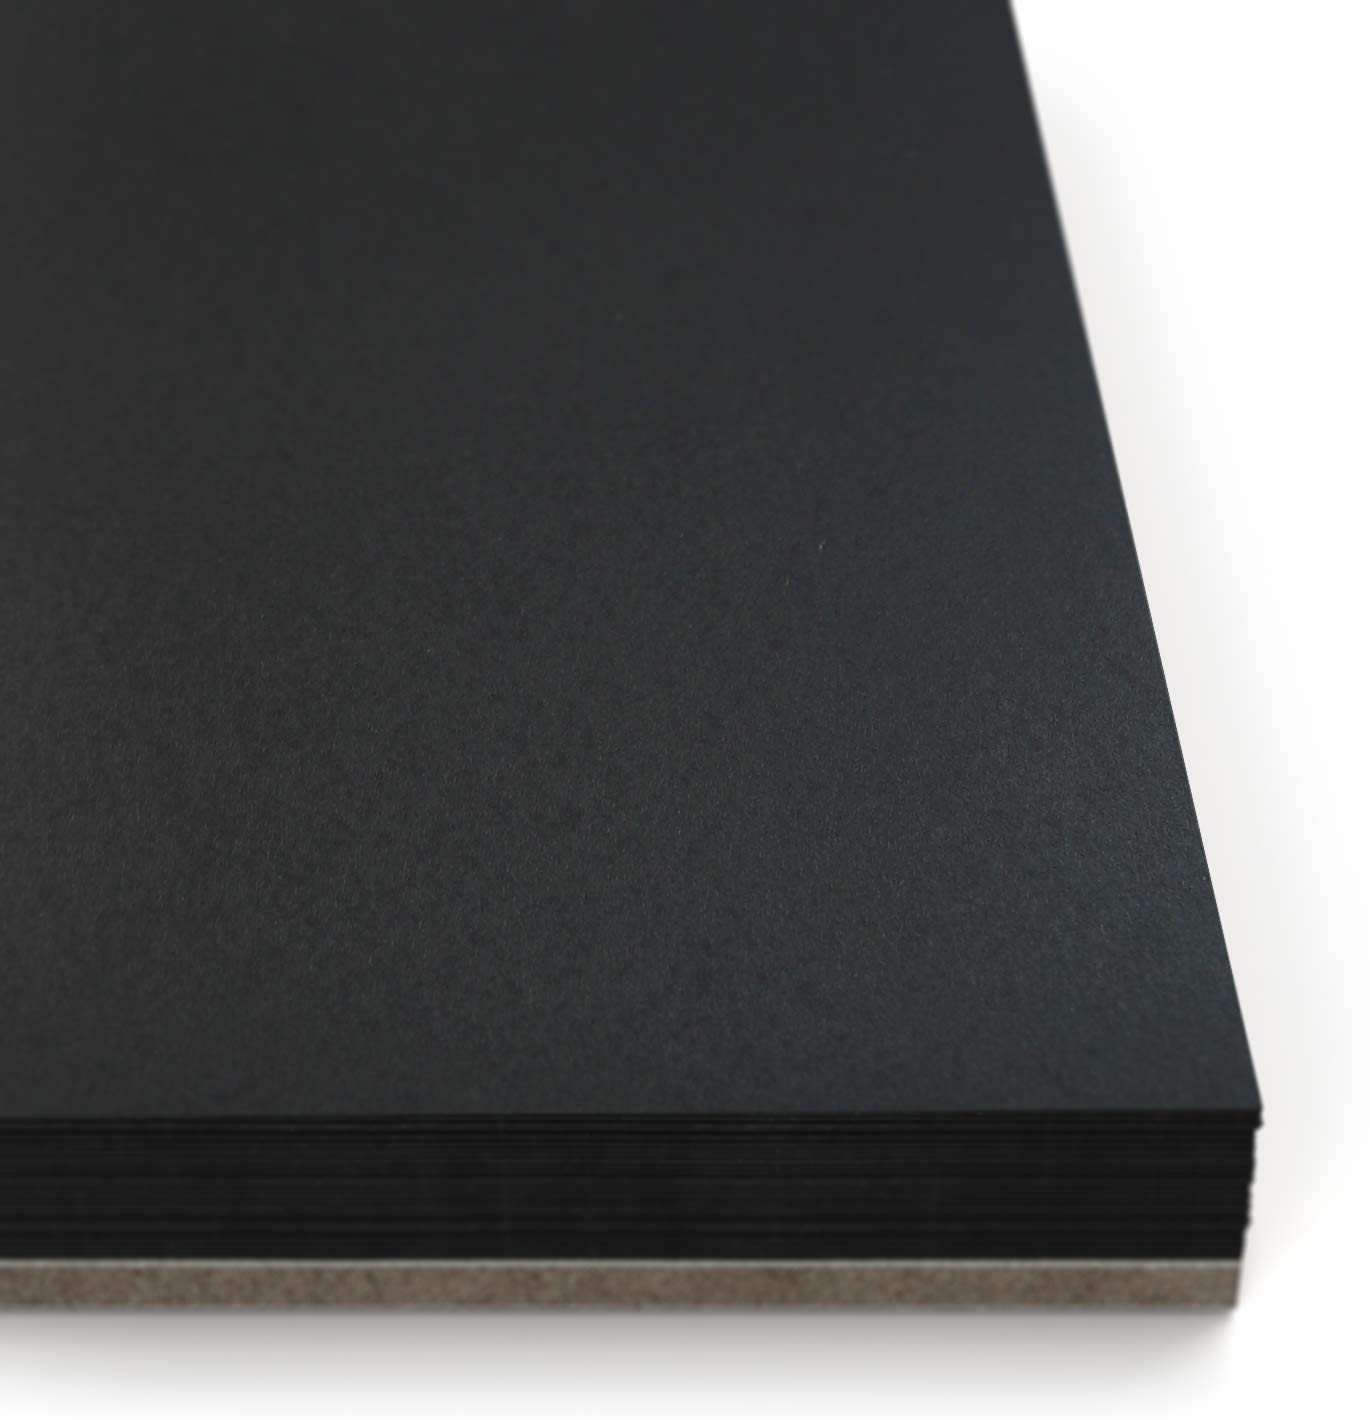 Black Paper Sketch Pad, 9" x 12", 30 Sheets (Multiple Packs Available)